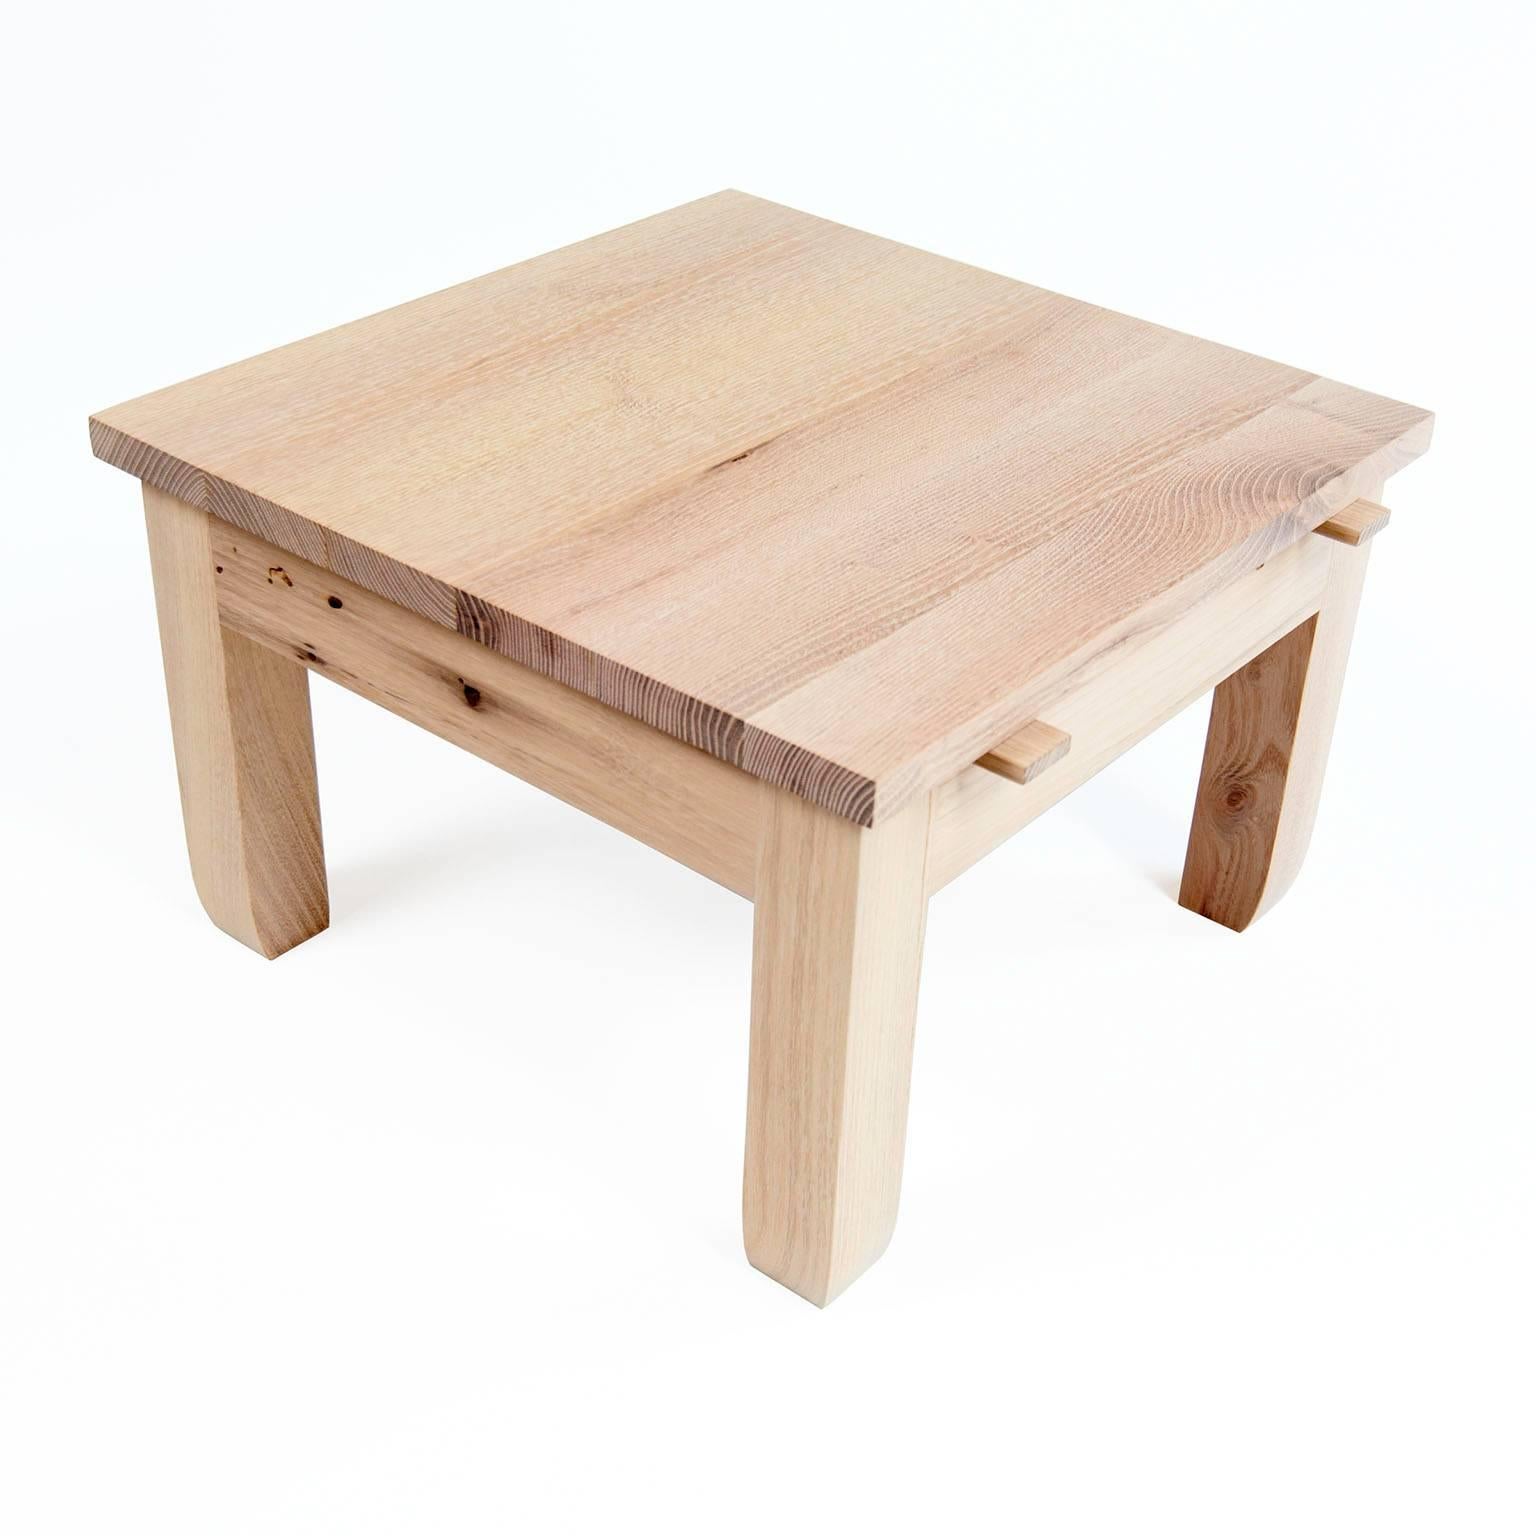 Modern Contemporary Hardwood Black Locust Outdoor Low Prayer Stool Made in Brooklyn For Sale